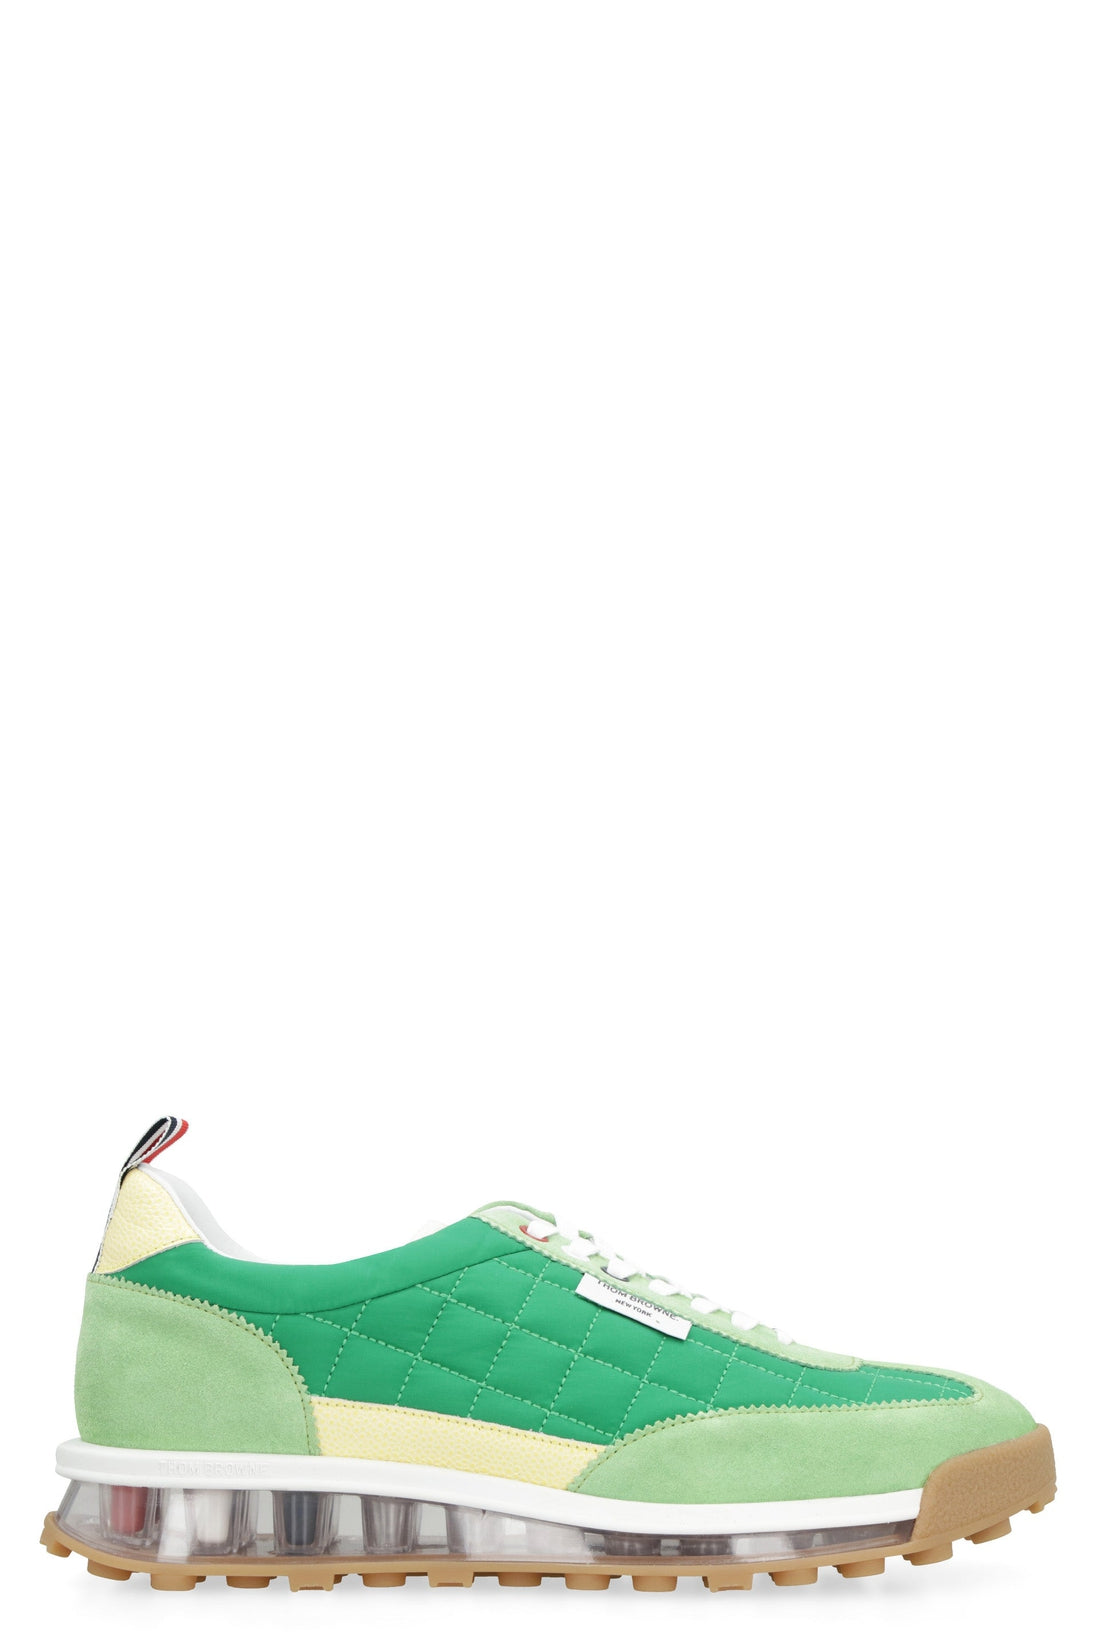 Thom Browne-OUTLET-SALE-Tech Runner low-top sneakers-ARCHIVIST